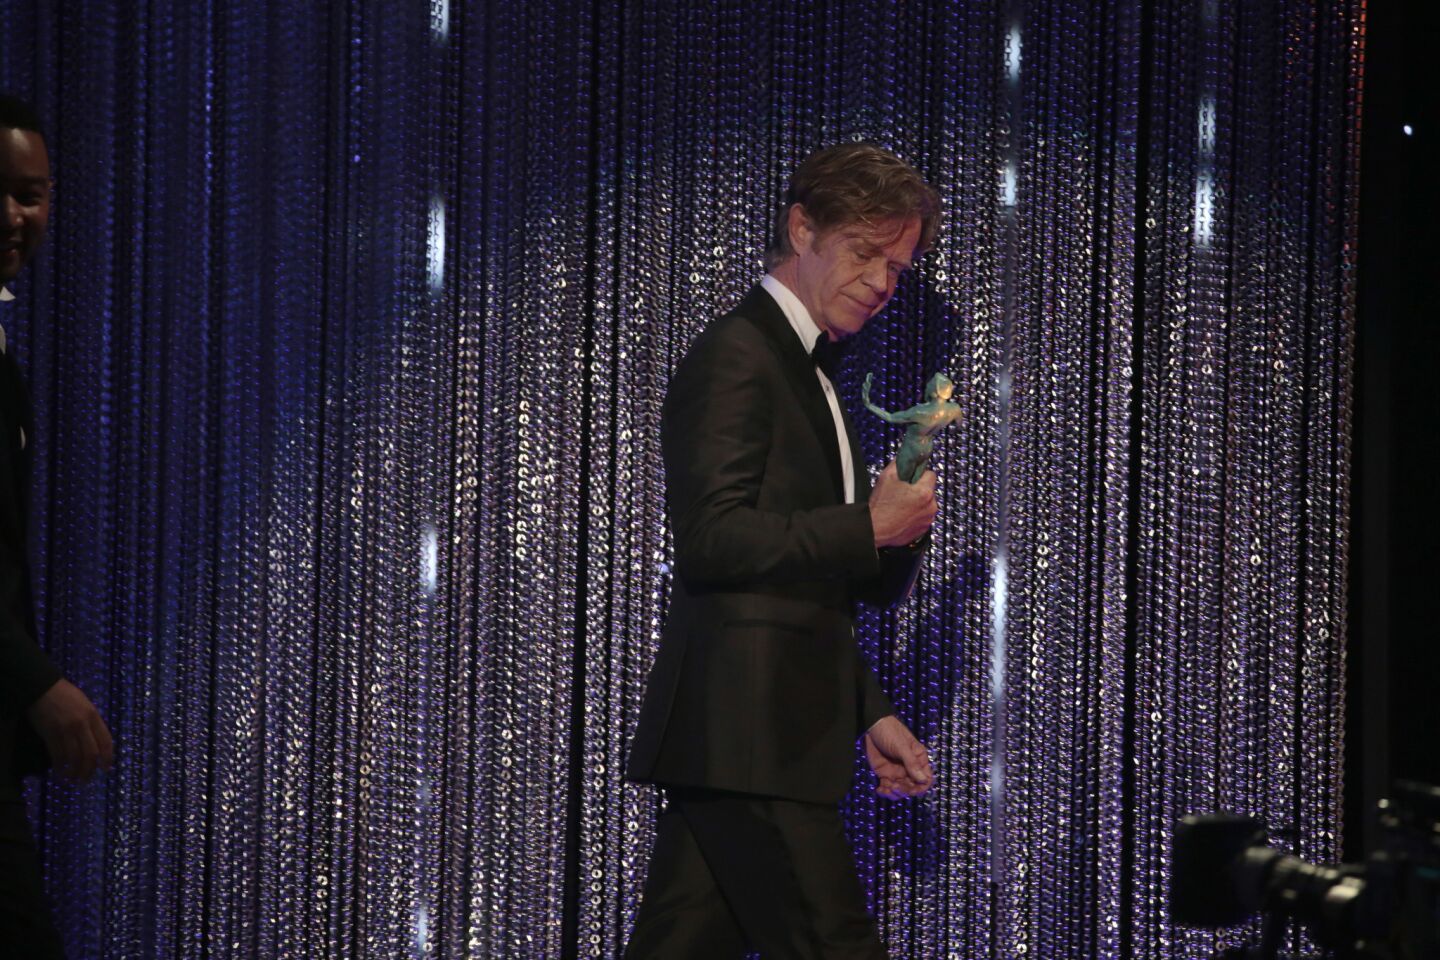 William H. Macy won for male actor in a comedy series.